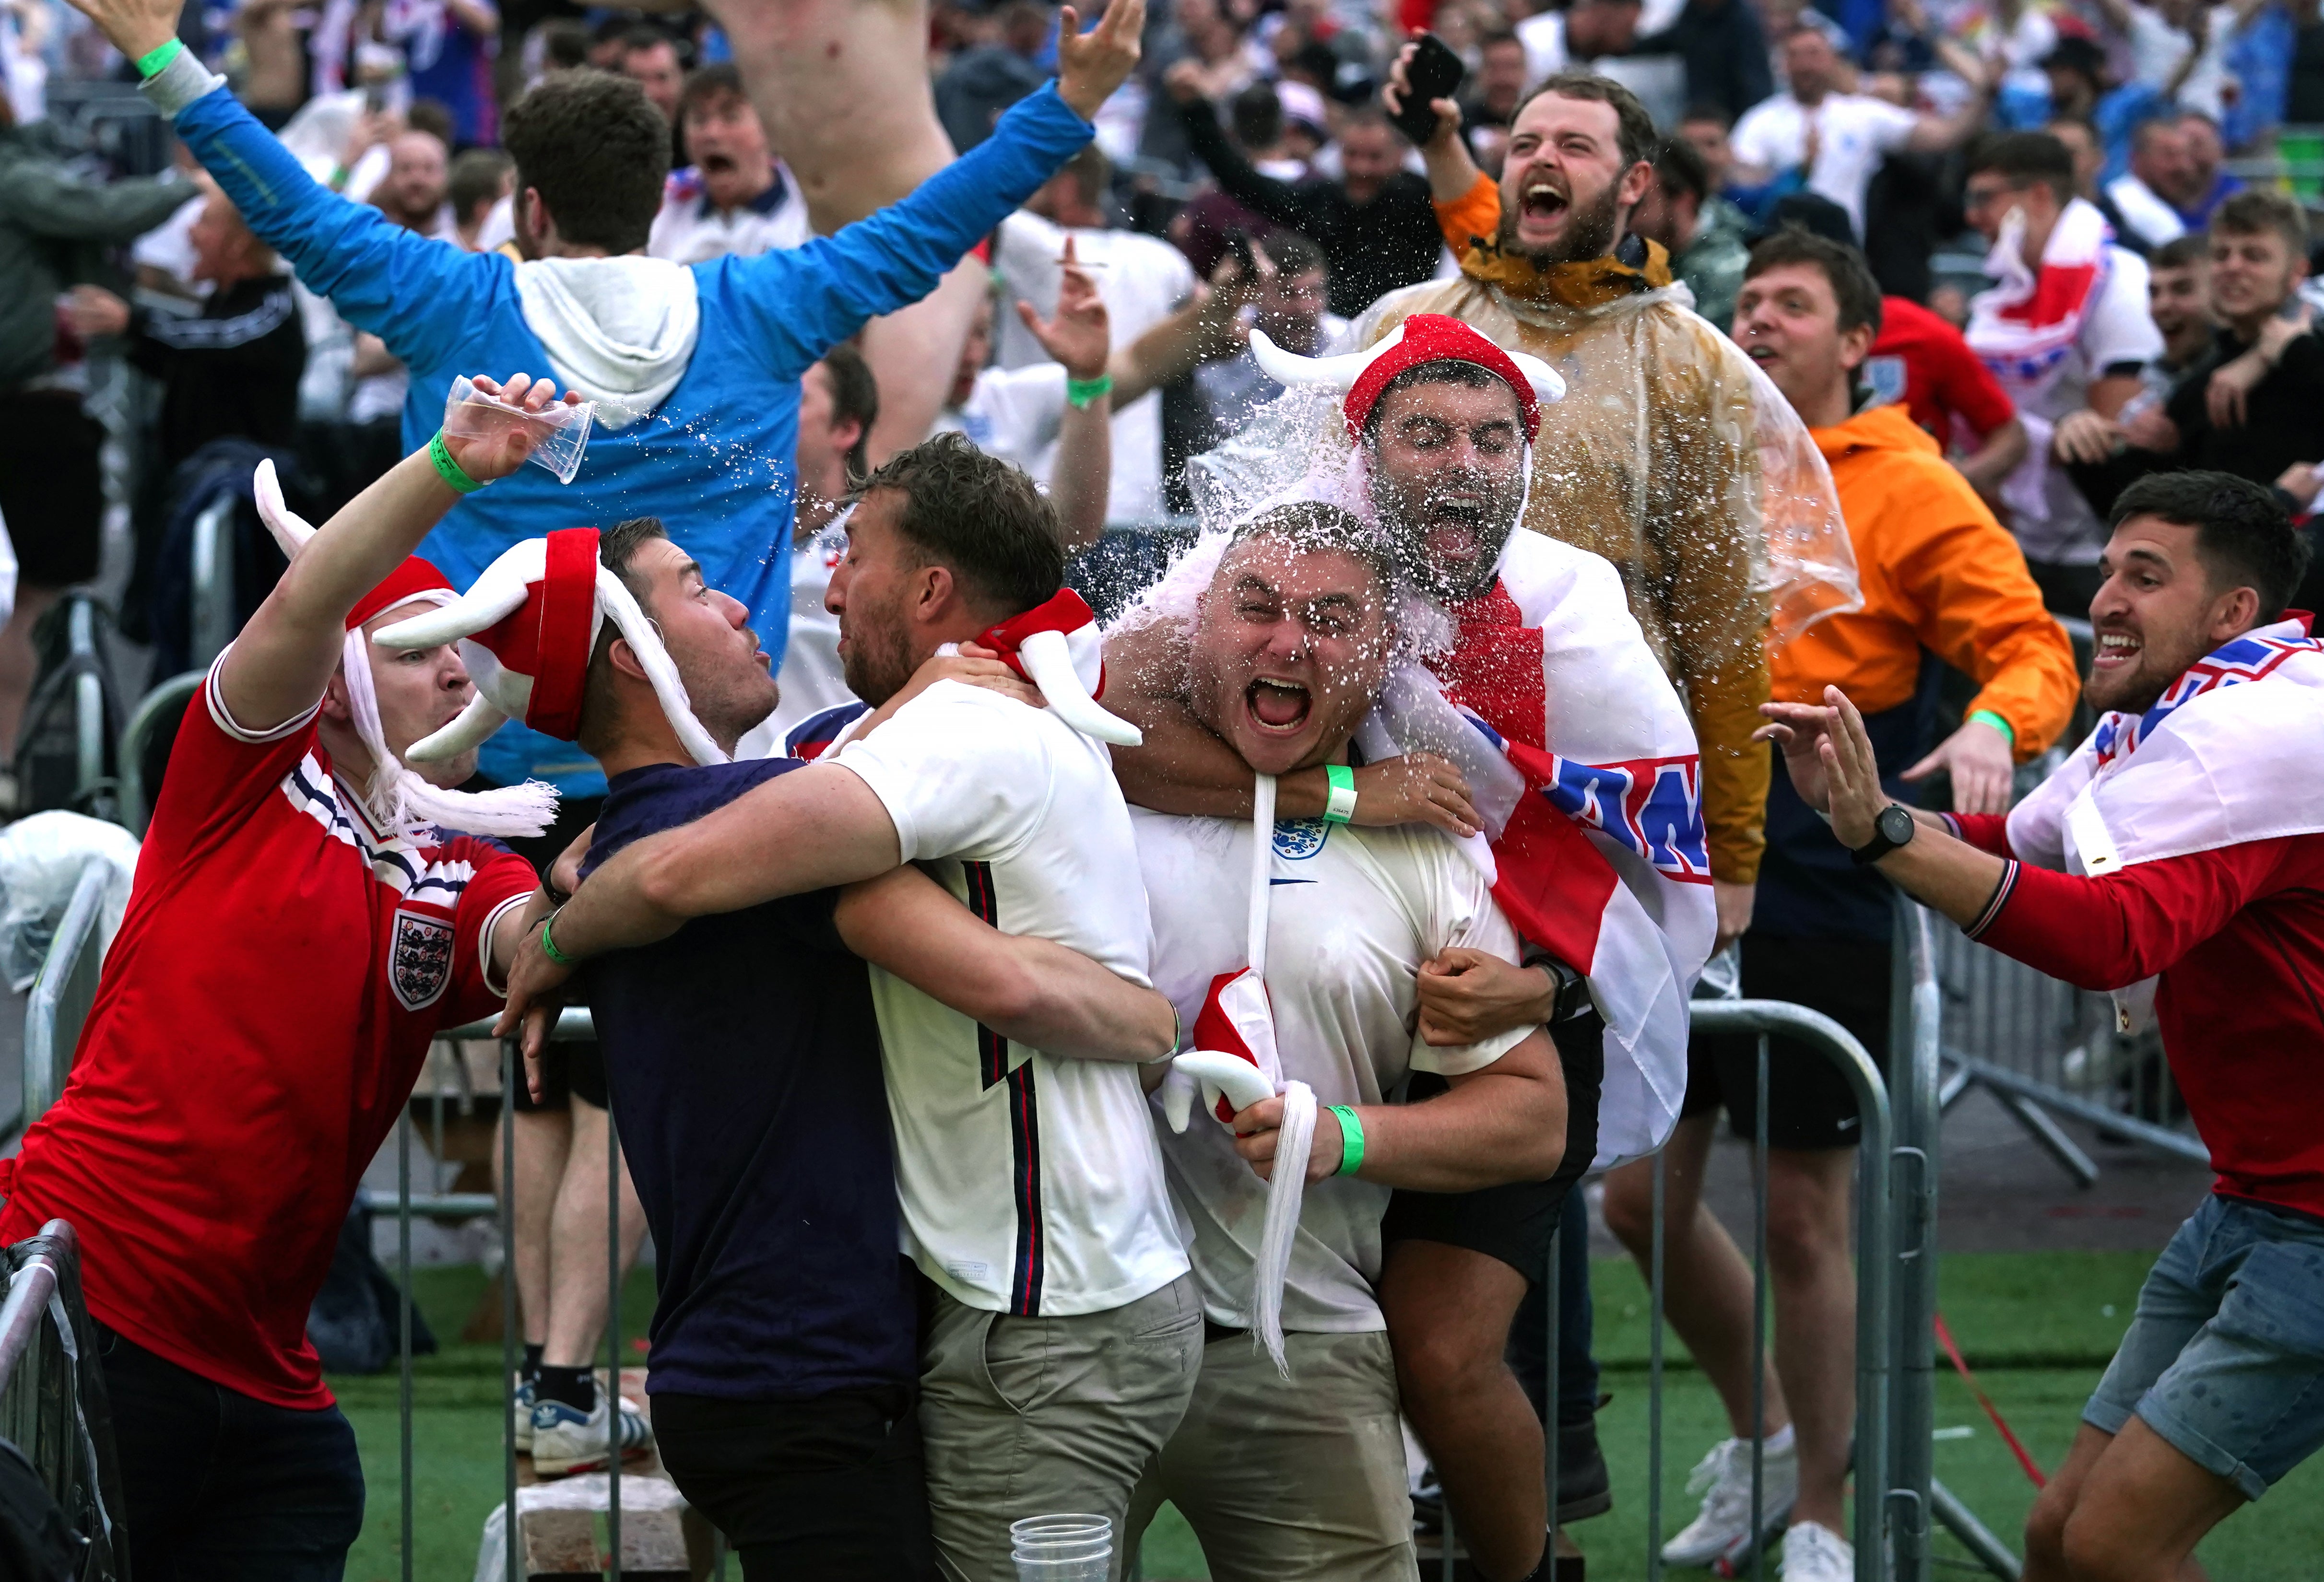 Fans in Manchester celebrate an England goal